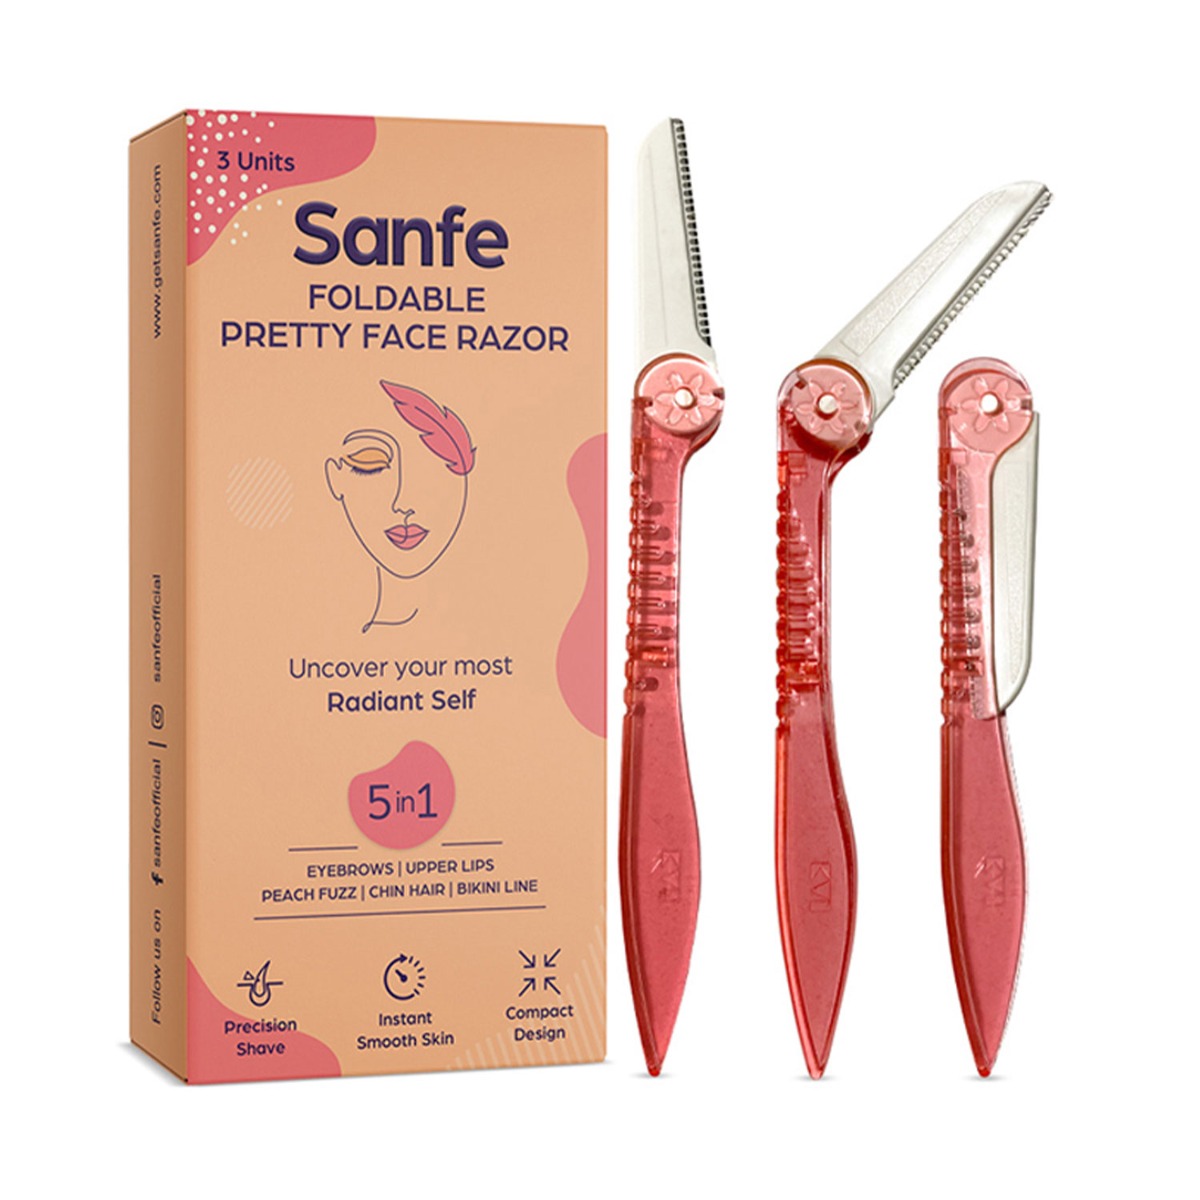 Sanfe Pretty Face Razor for pain-free facial hair removal (3 units) - upper lips, chin, peach fuzz - Stainless steel blade, comfortable, firm grip